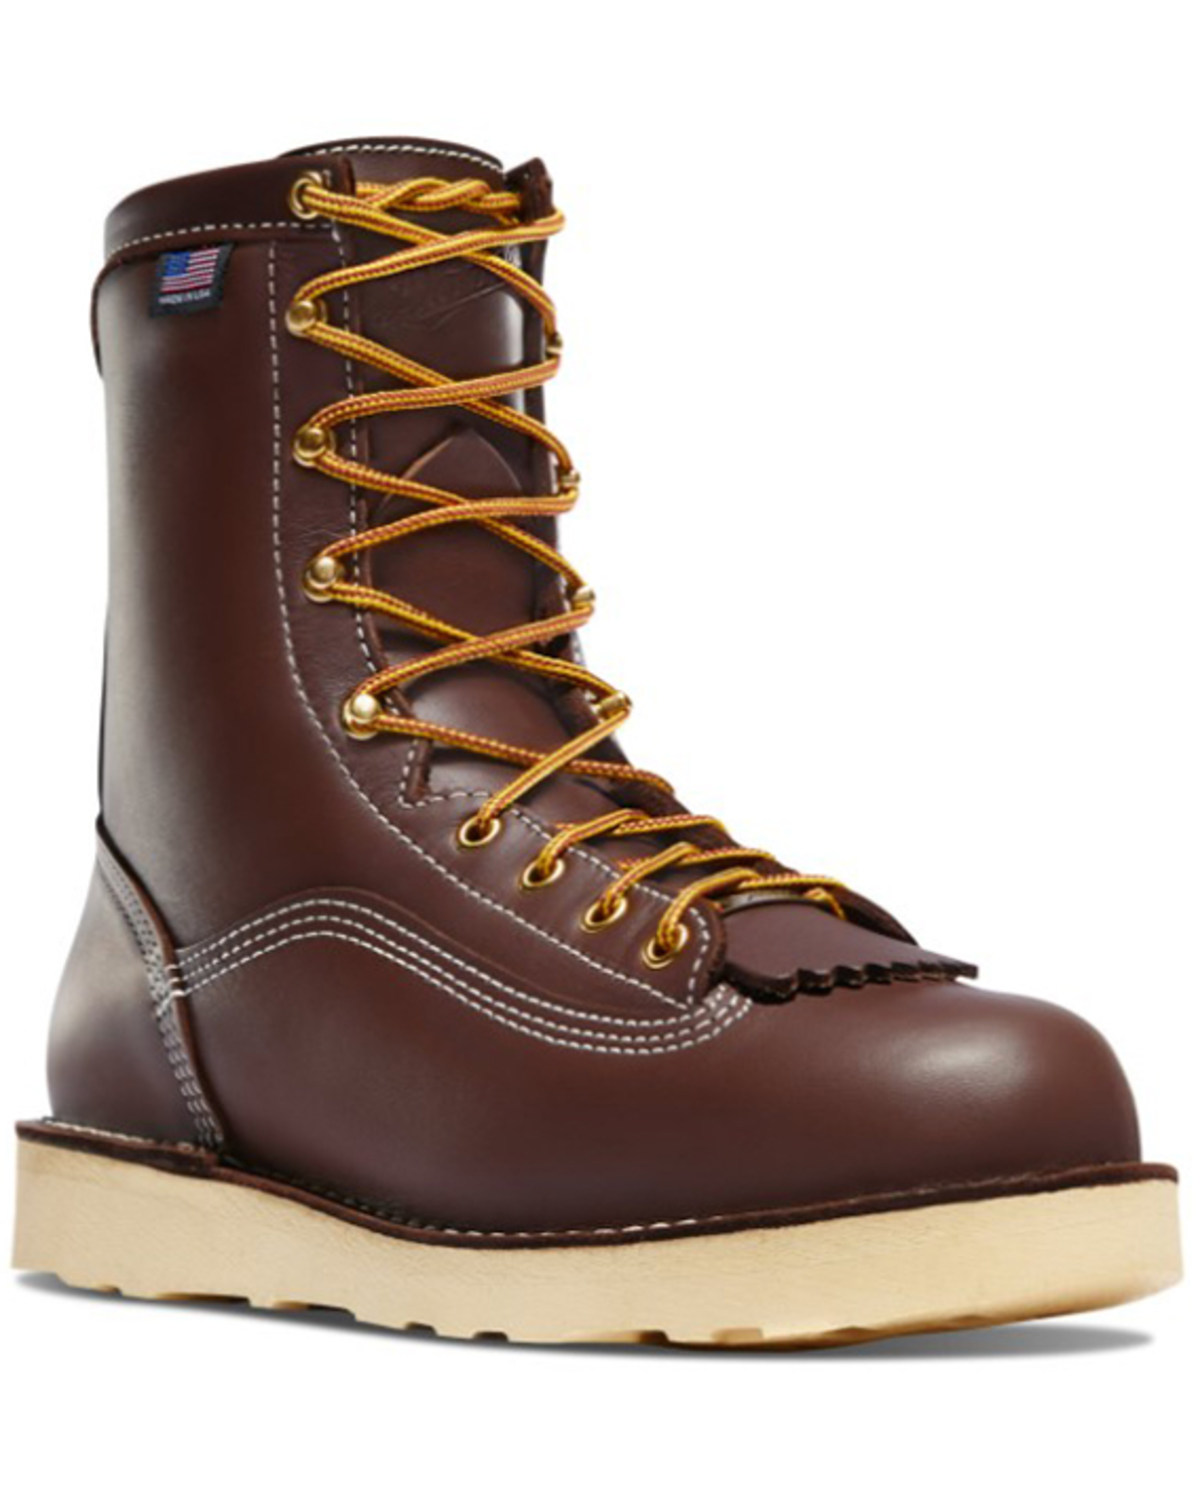 Danner Men's 8" Power Foreman Lace-Up Work Boots - Round Toe